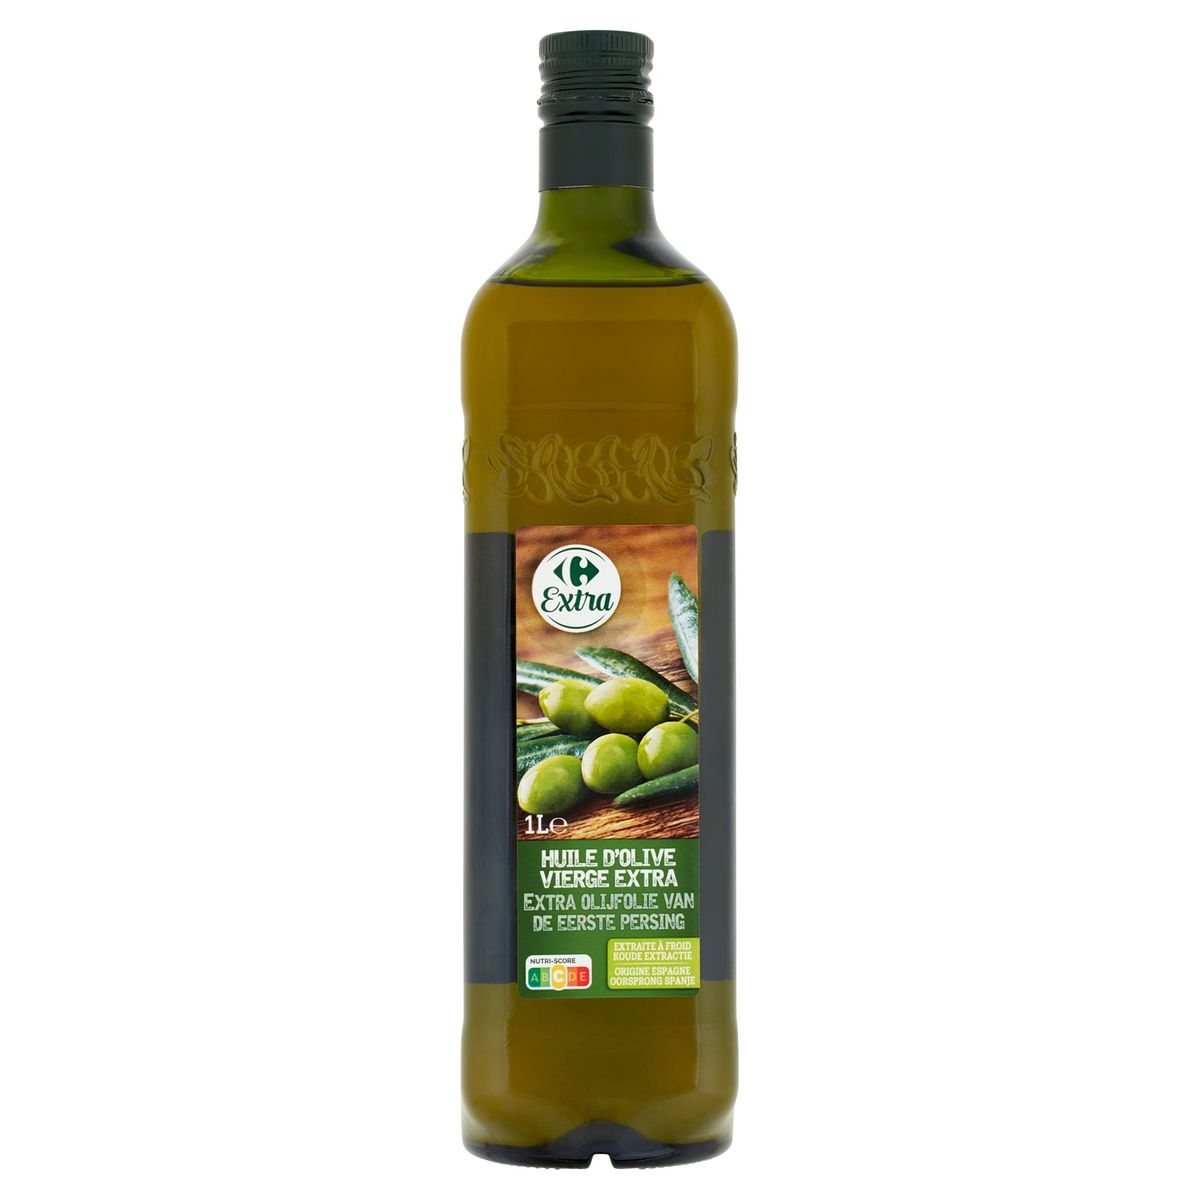 Huile d'olive vierge extra - Carrefour Bio - 1 l